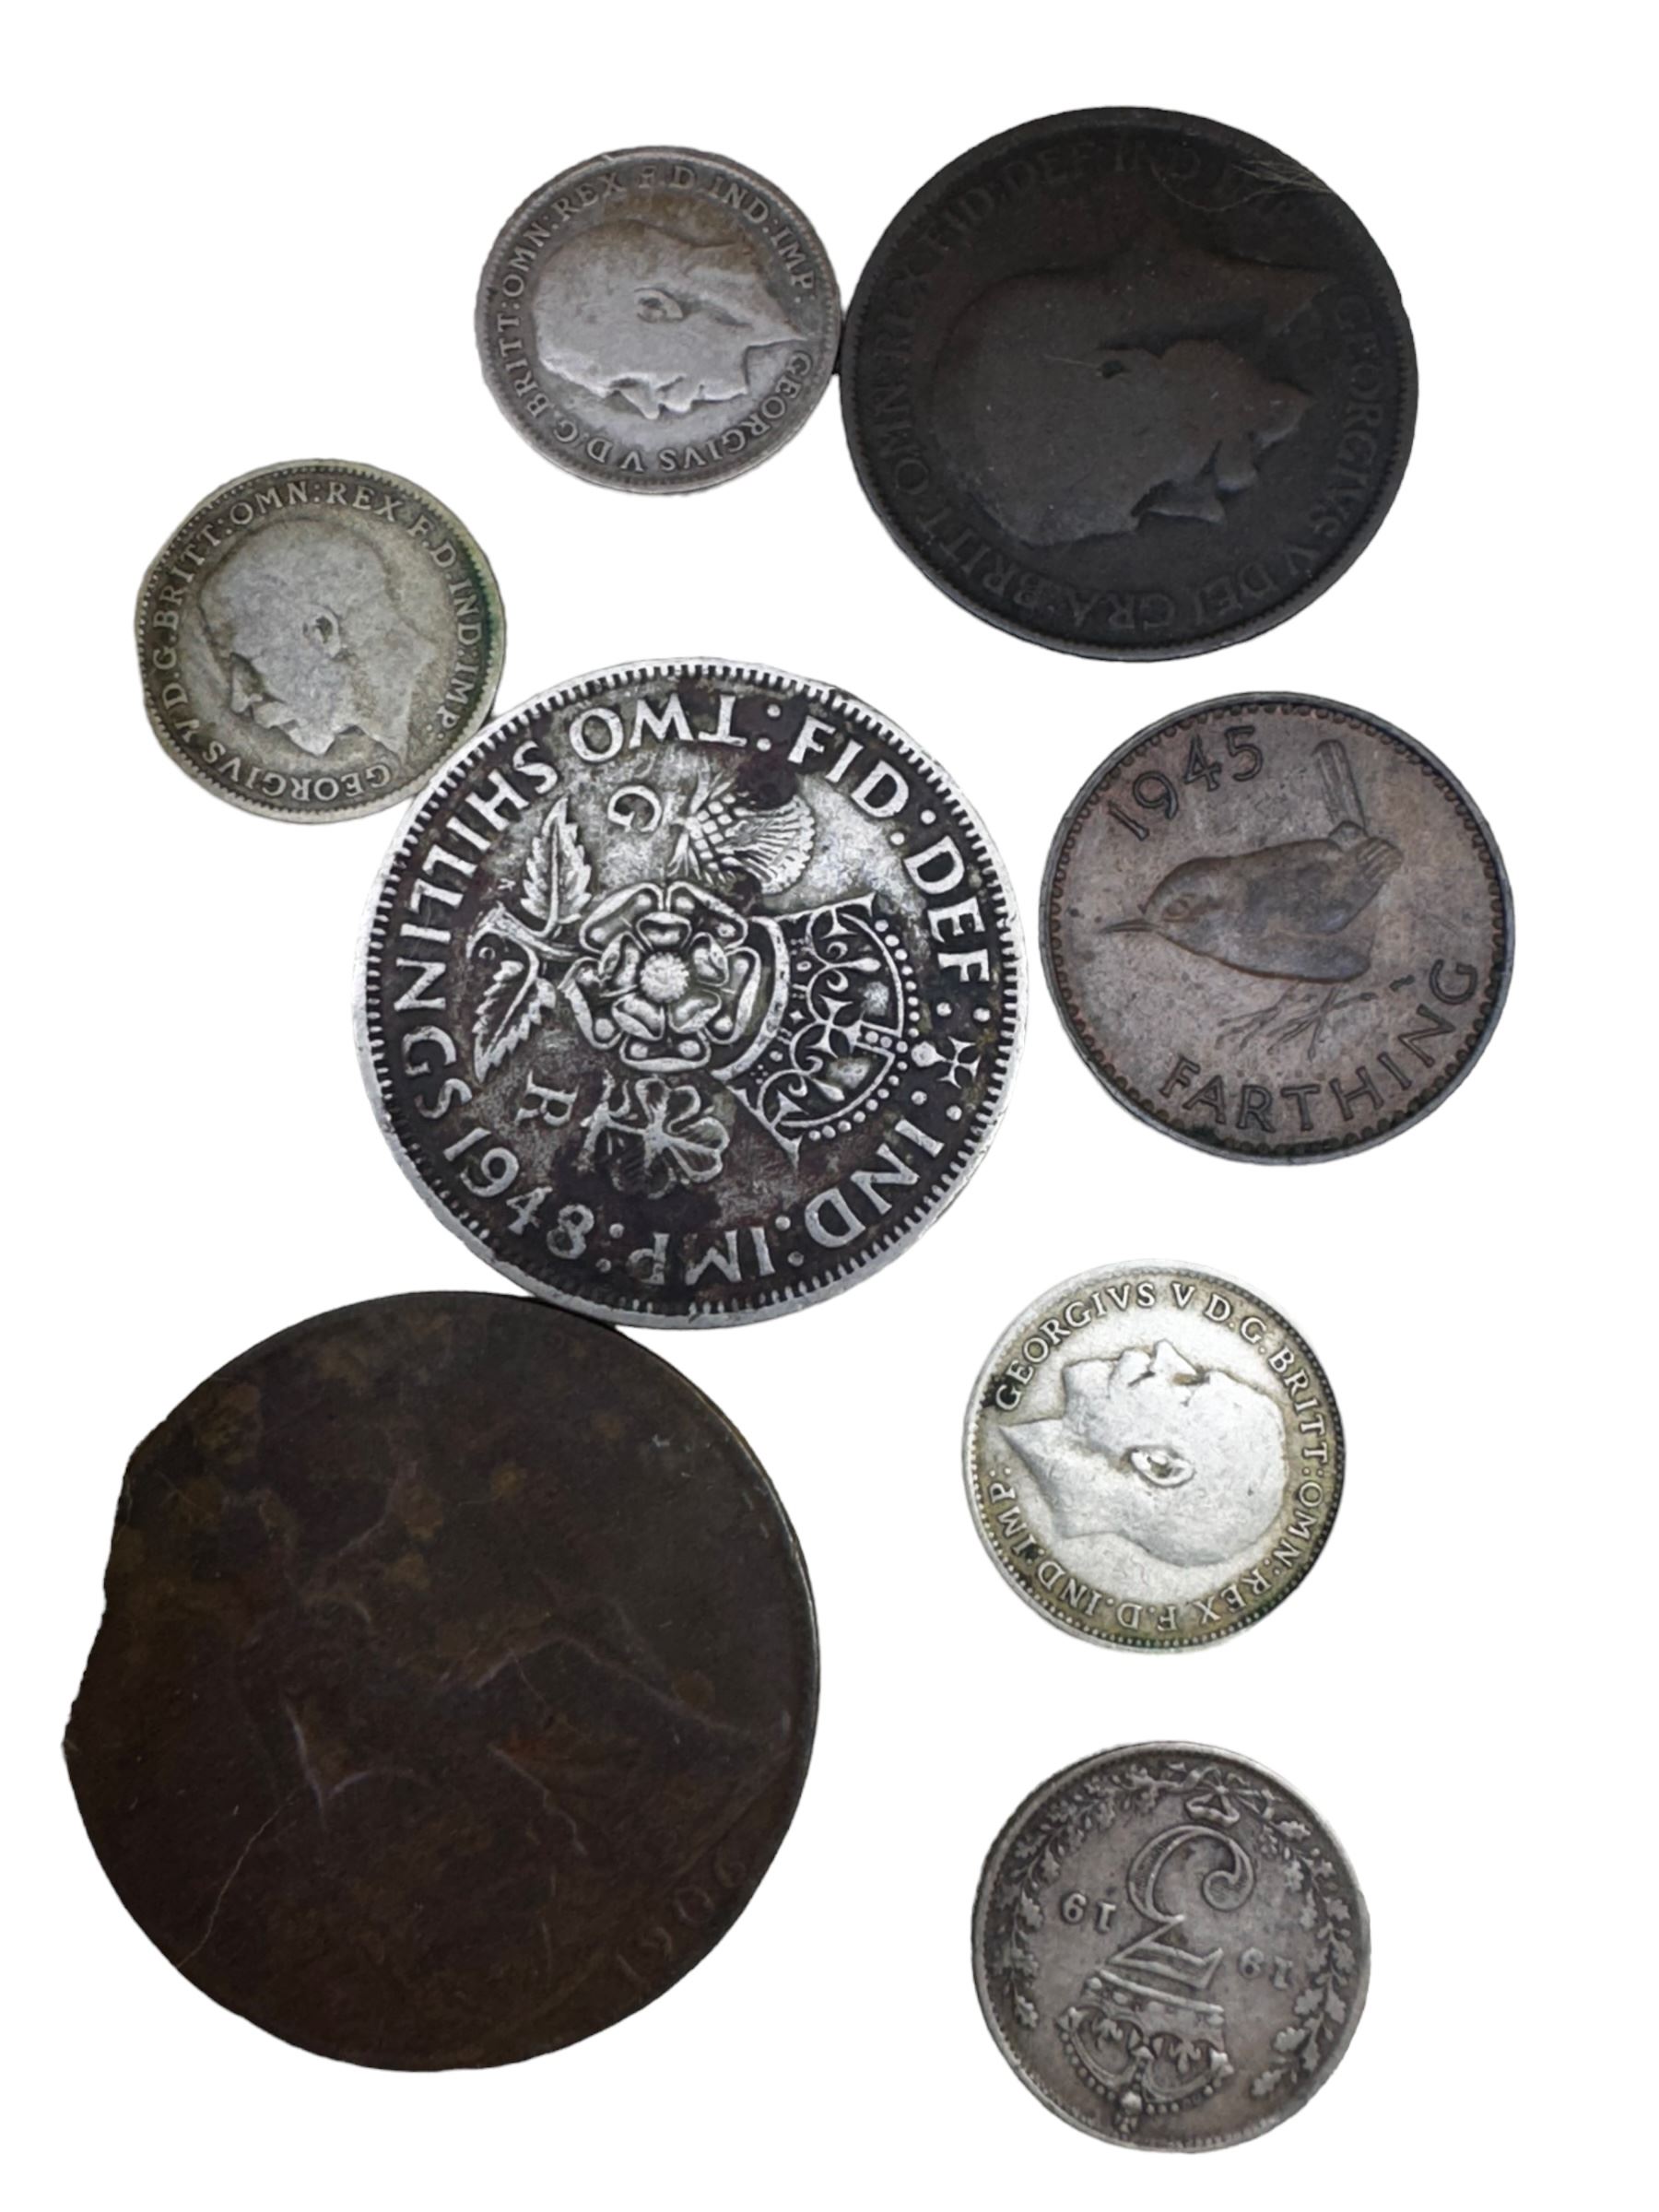 Mostly Great British coins - Image 2 of 7